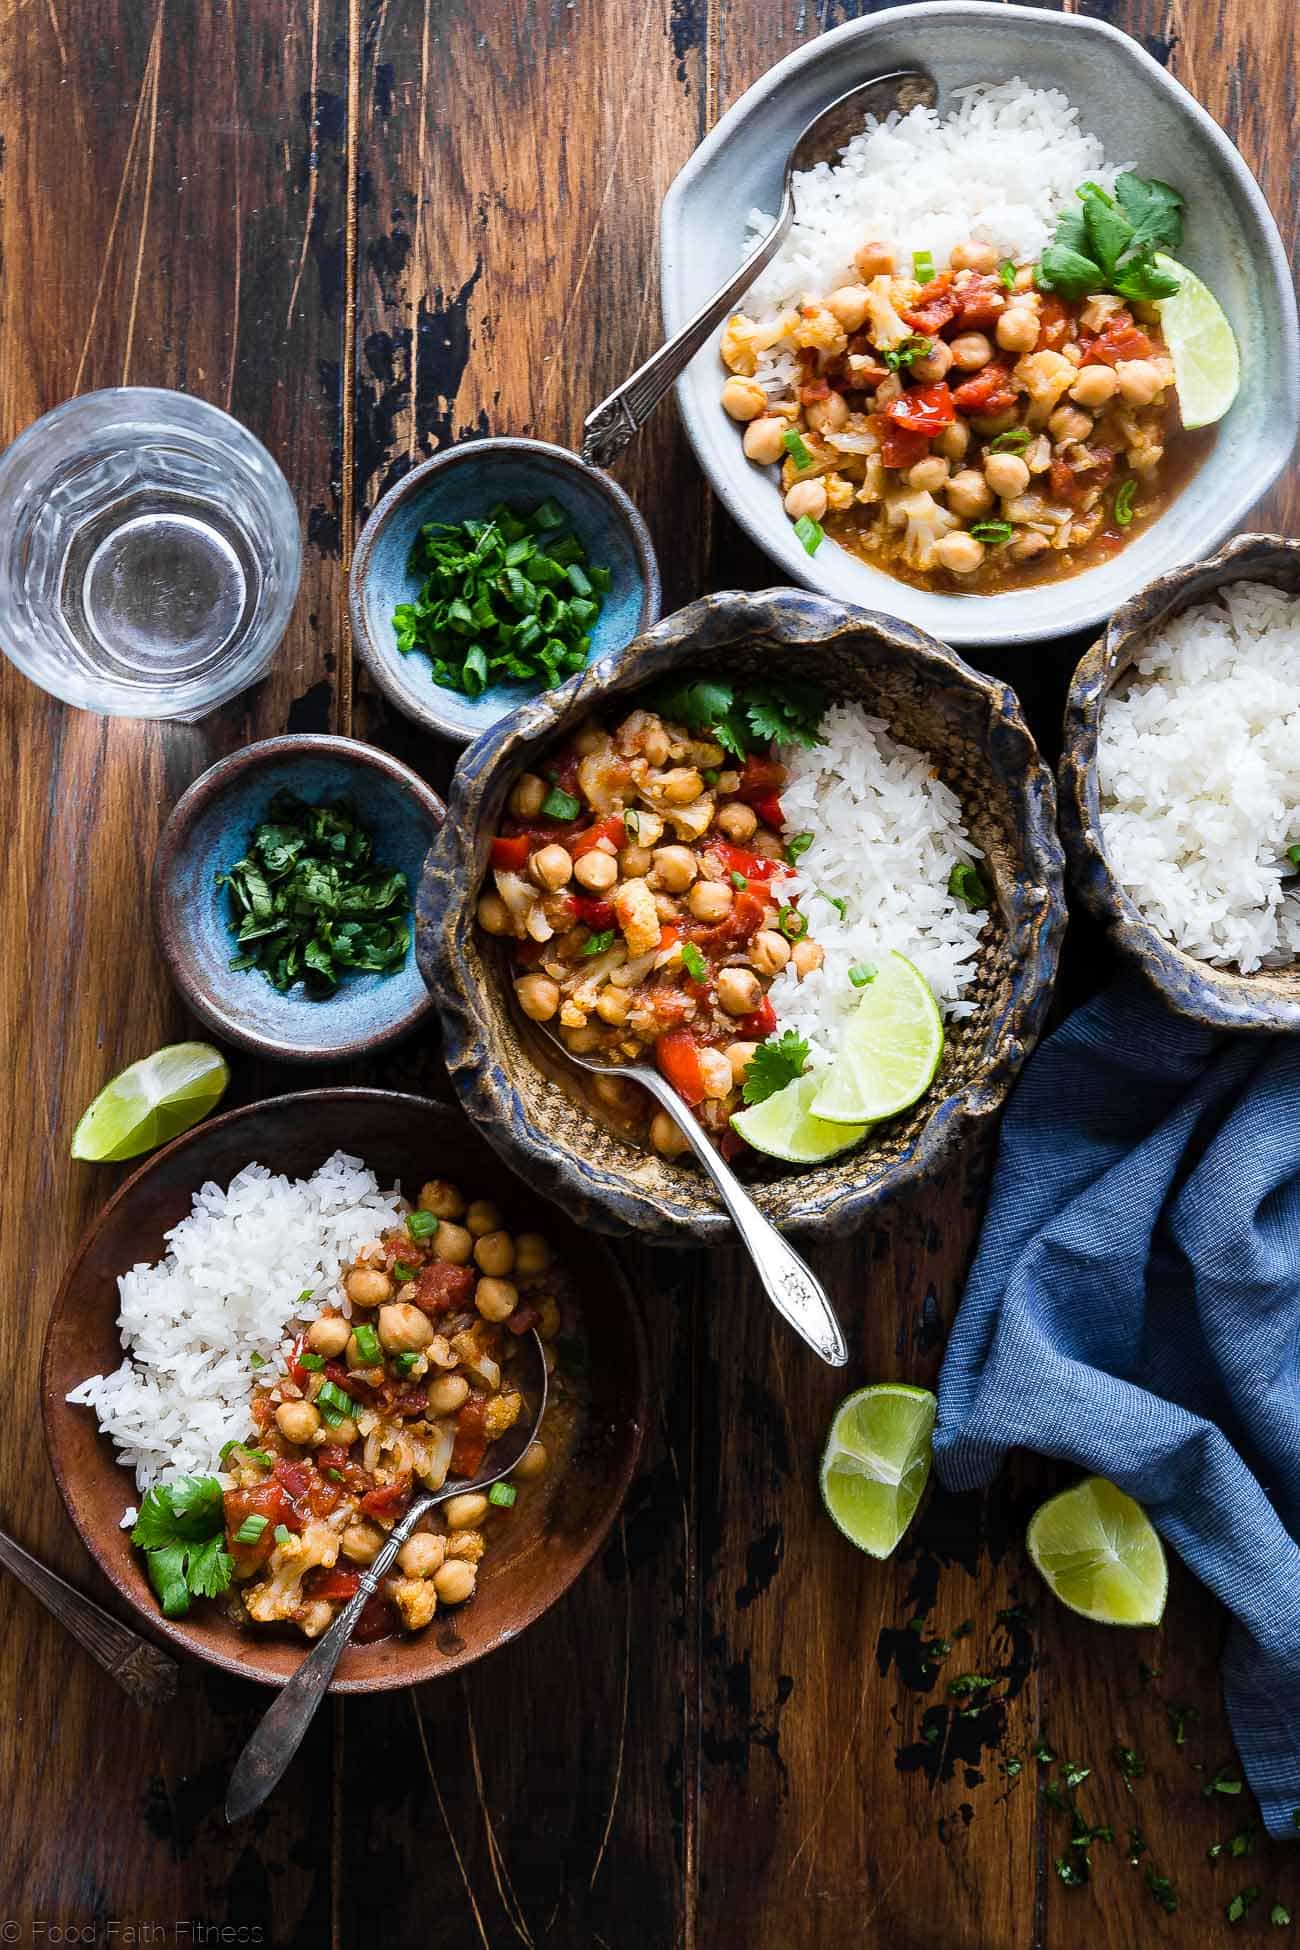 Instant Pot Vegan Chickpea Curry - This easy healthy chickpea curry is made in the Instant Pot and ready in 20 mins! It uses coconut milk and tomatoes to make it thick and so creamy! Makes great leftovers and is great for meal prep! | Foodfaithfitness.com | @FoodFaithFit